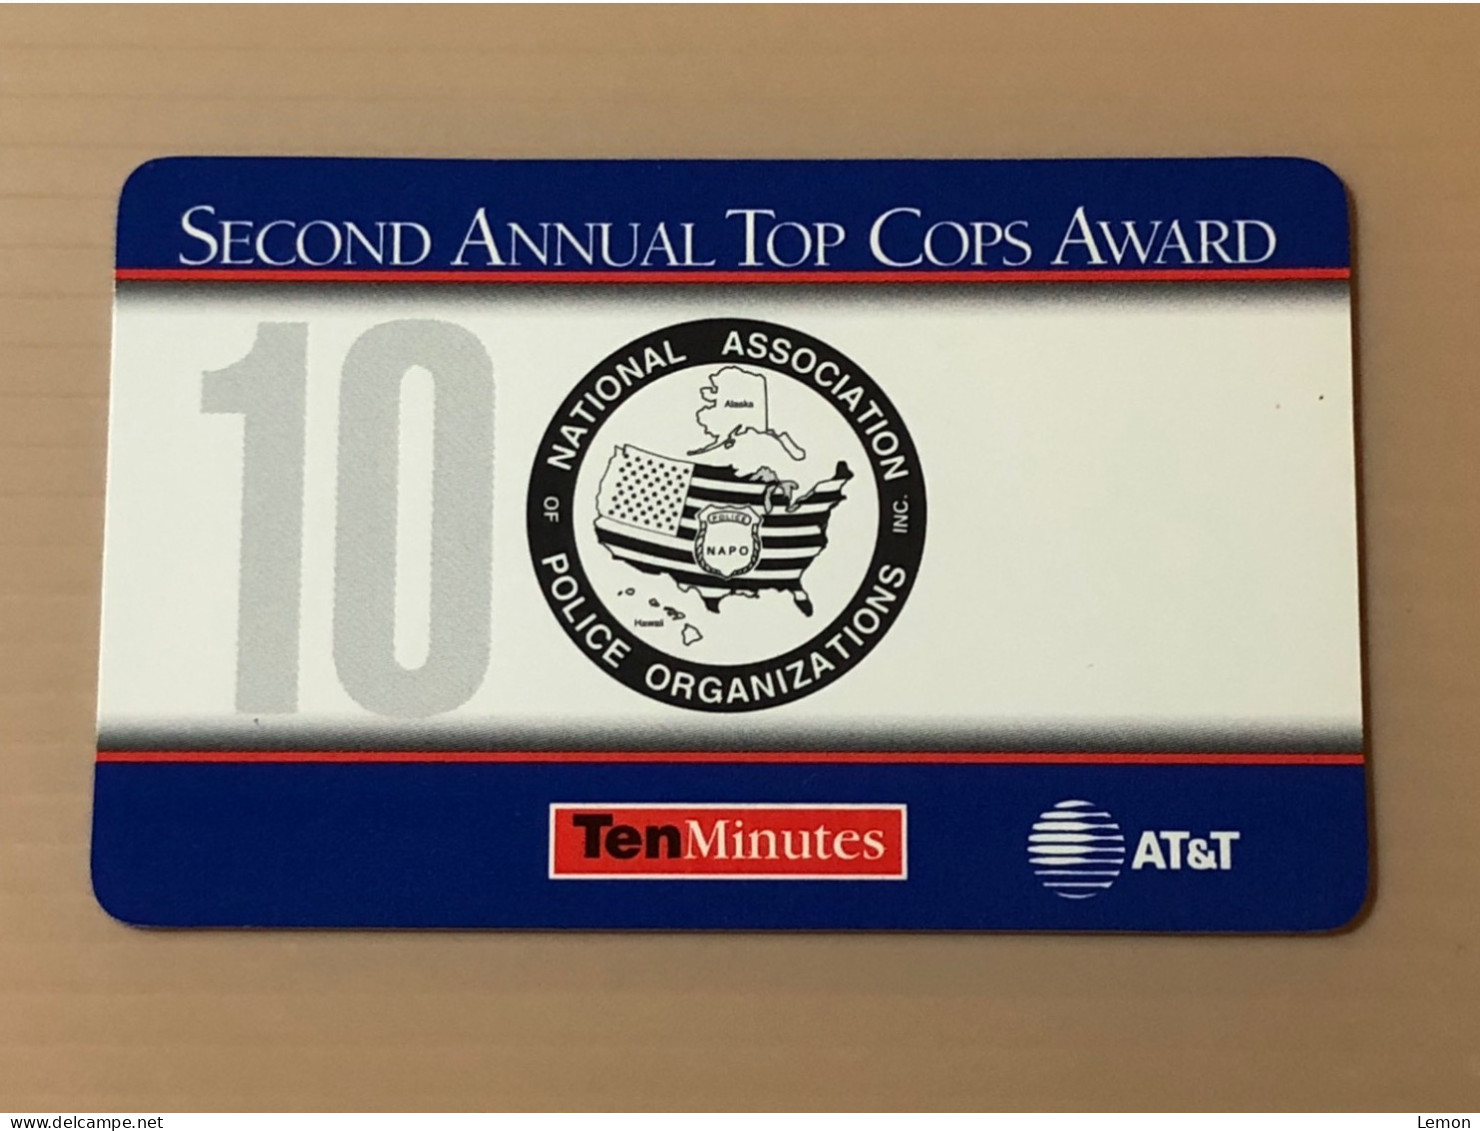 Mint USA UNITED STATES America Prepaid Telecard Phonecard, AT&T Annual Top Cops Award SAMPLE CARD, Set Of 1 Mint Card - Collections